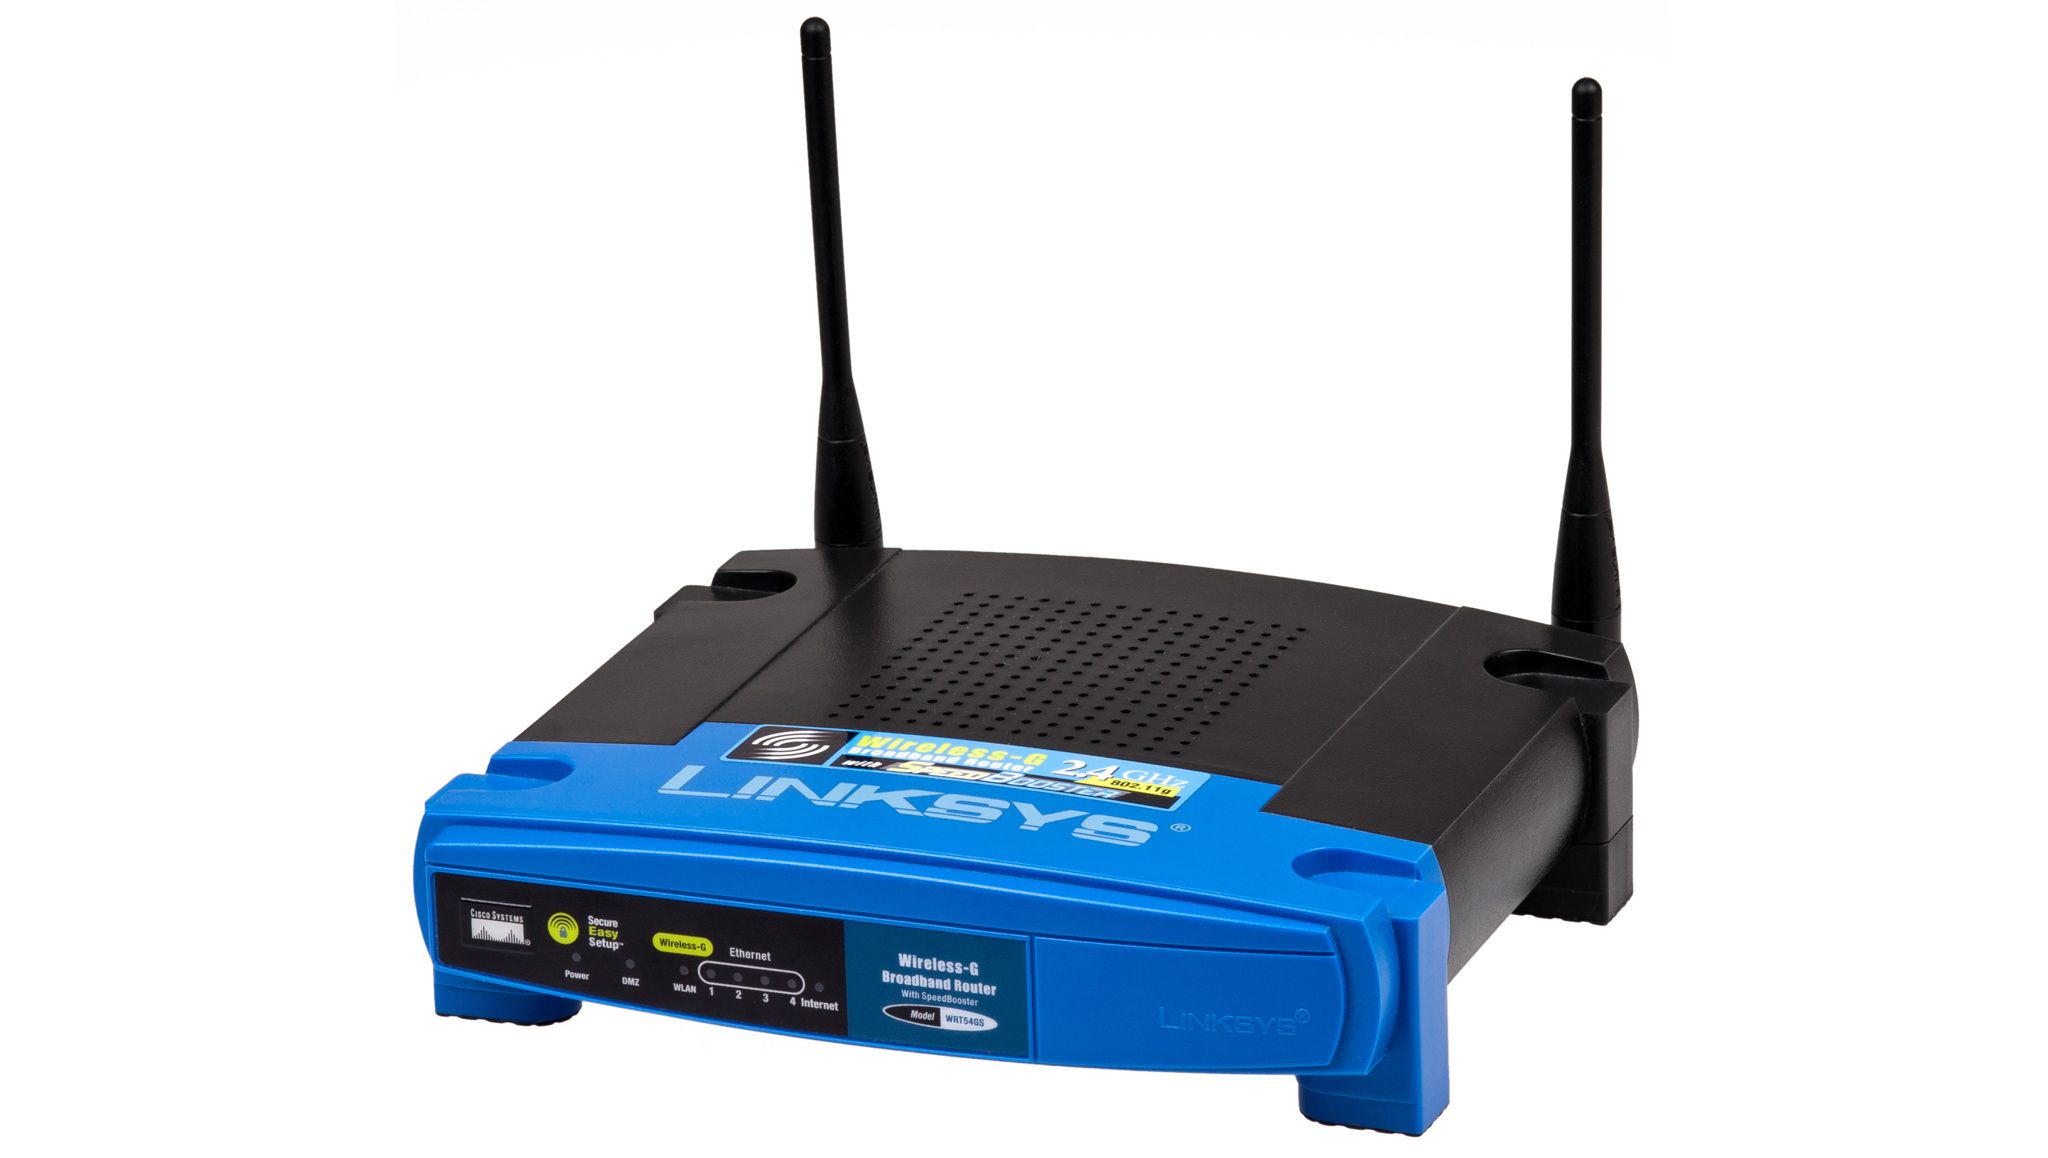 Hijacked Linksys Router